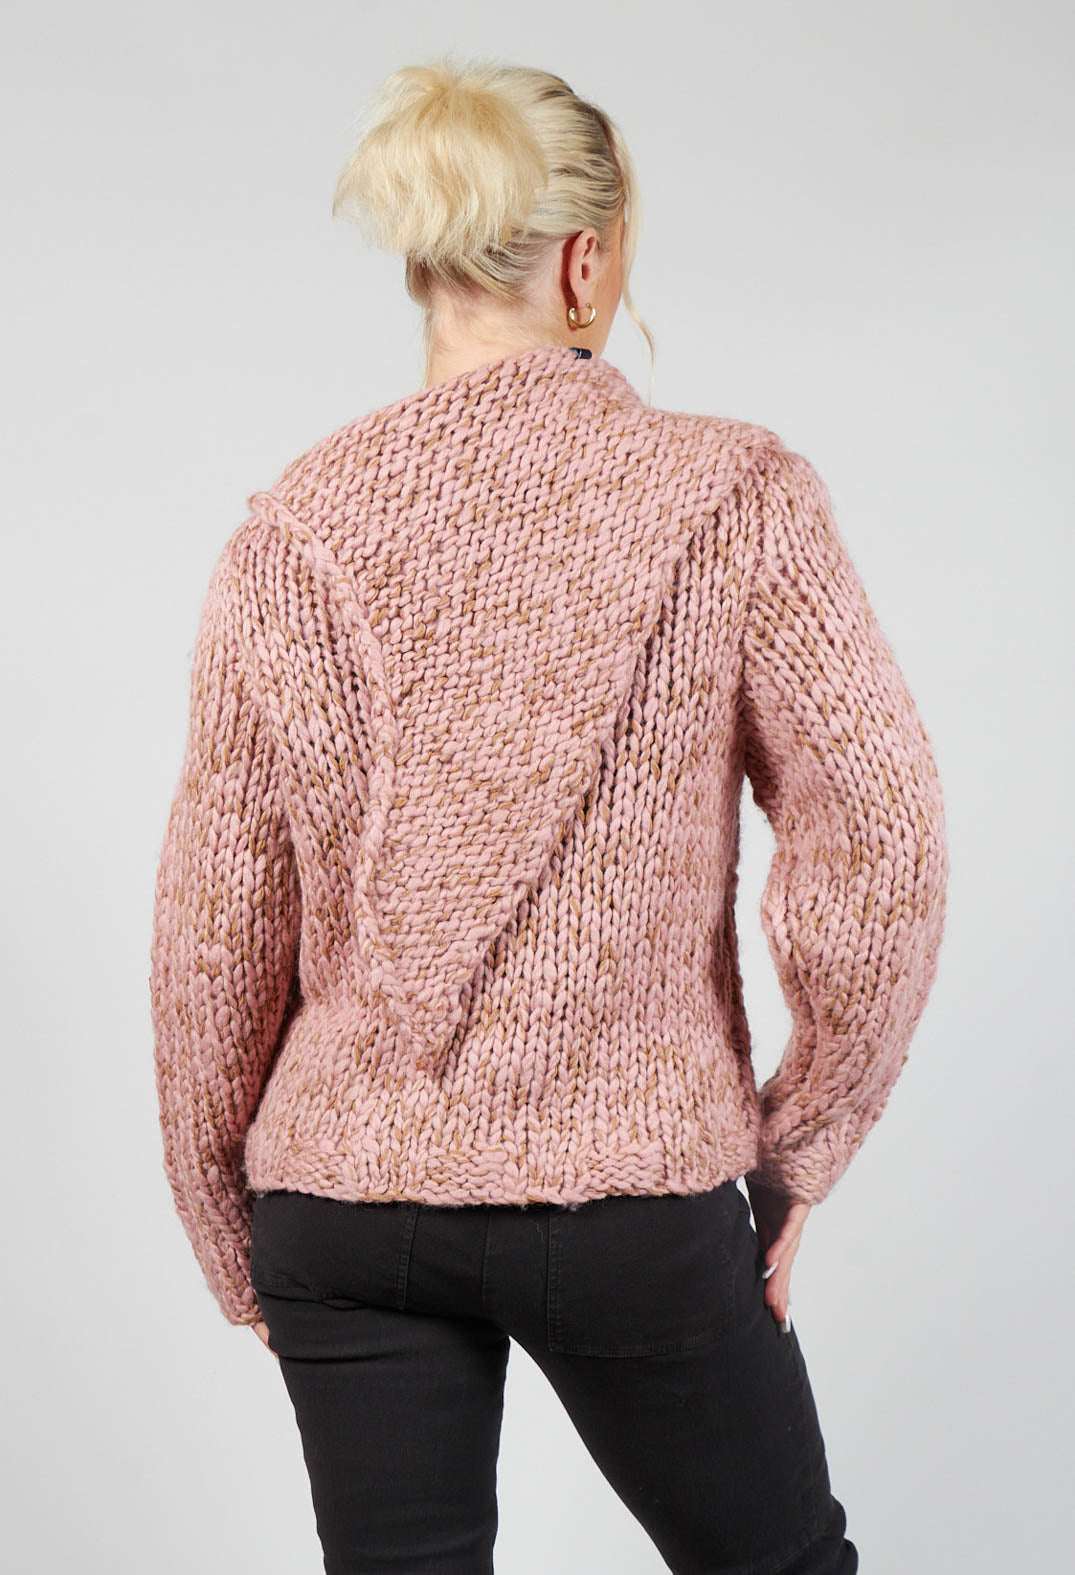 Chunky Knit Jumper in Amaretto